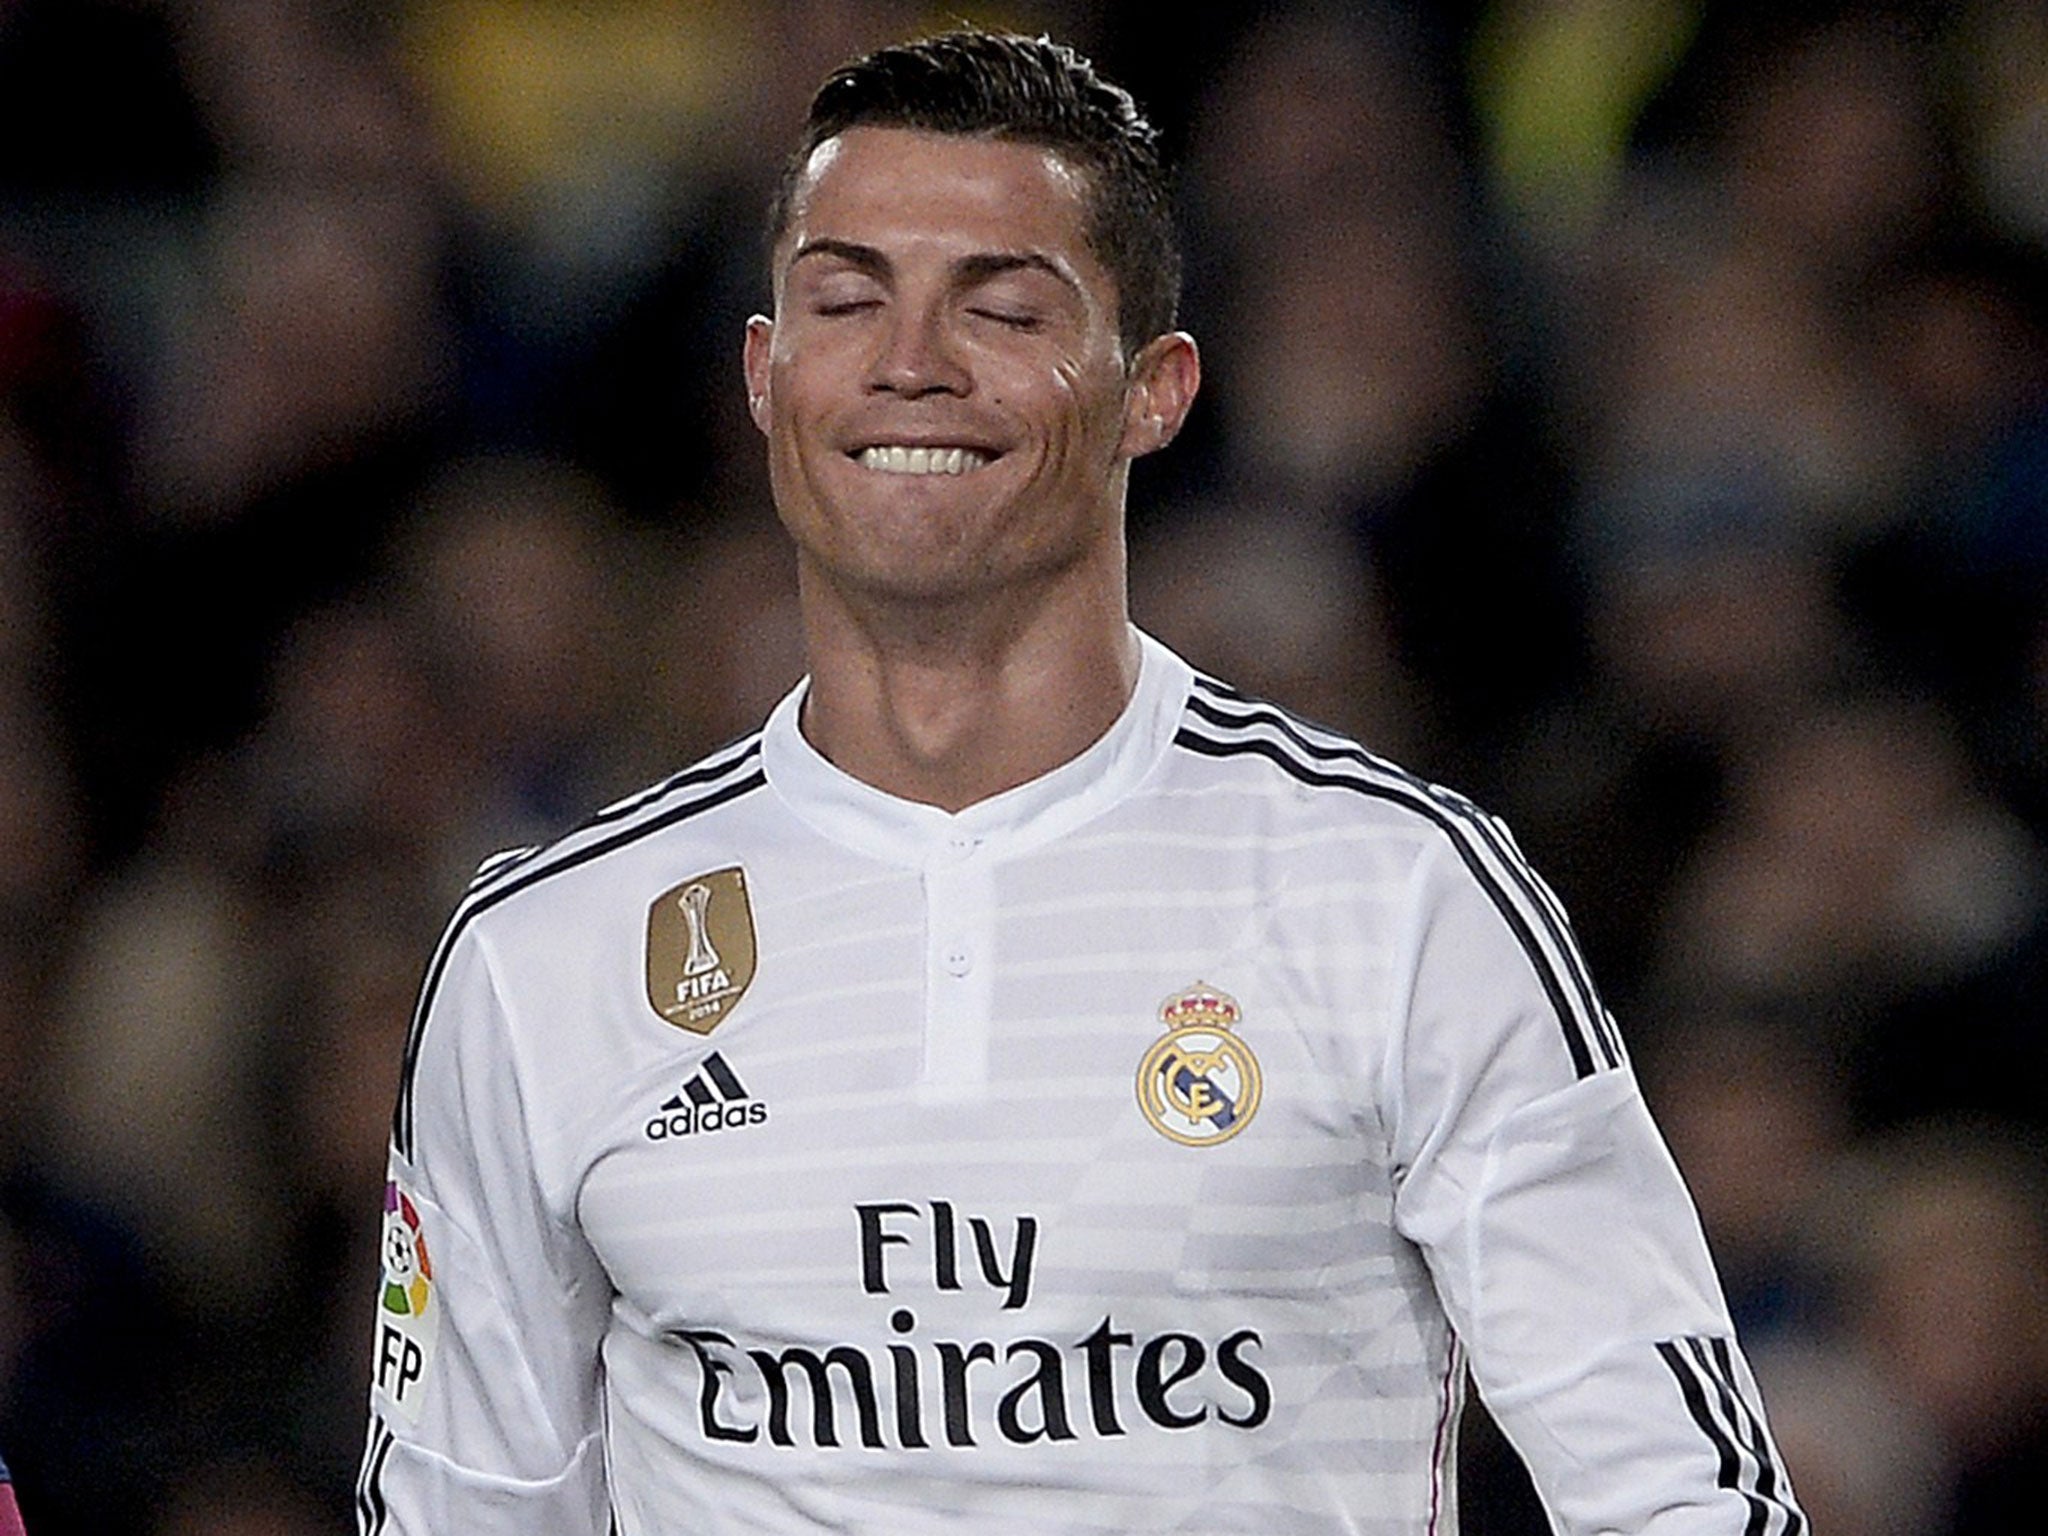 Cristiano Ronaldo during the 2-1 defeat to Barcelona